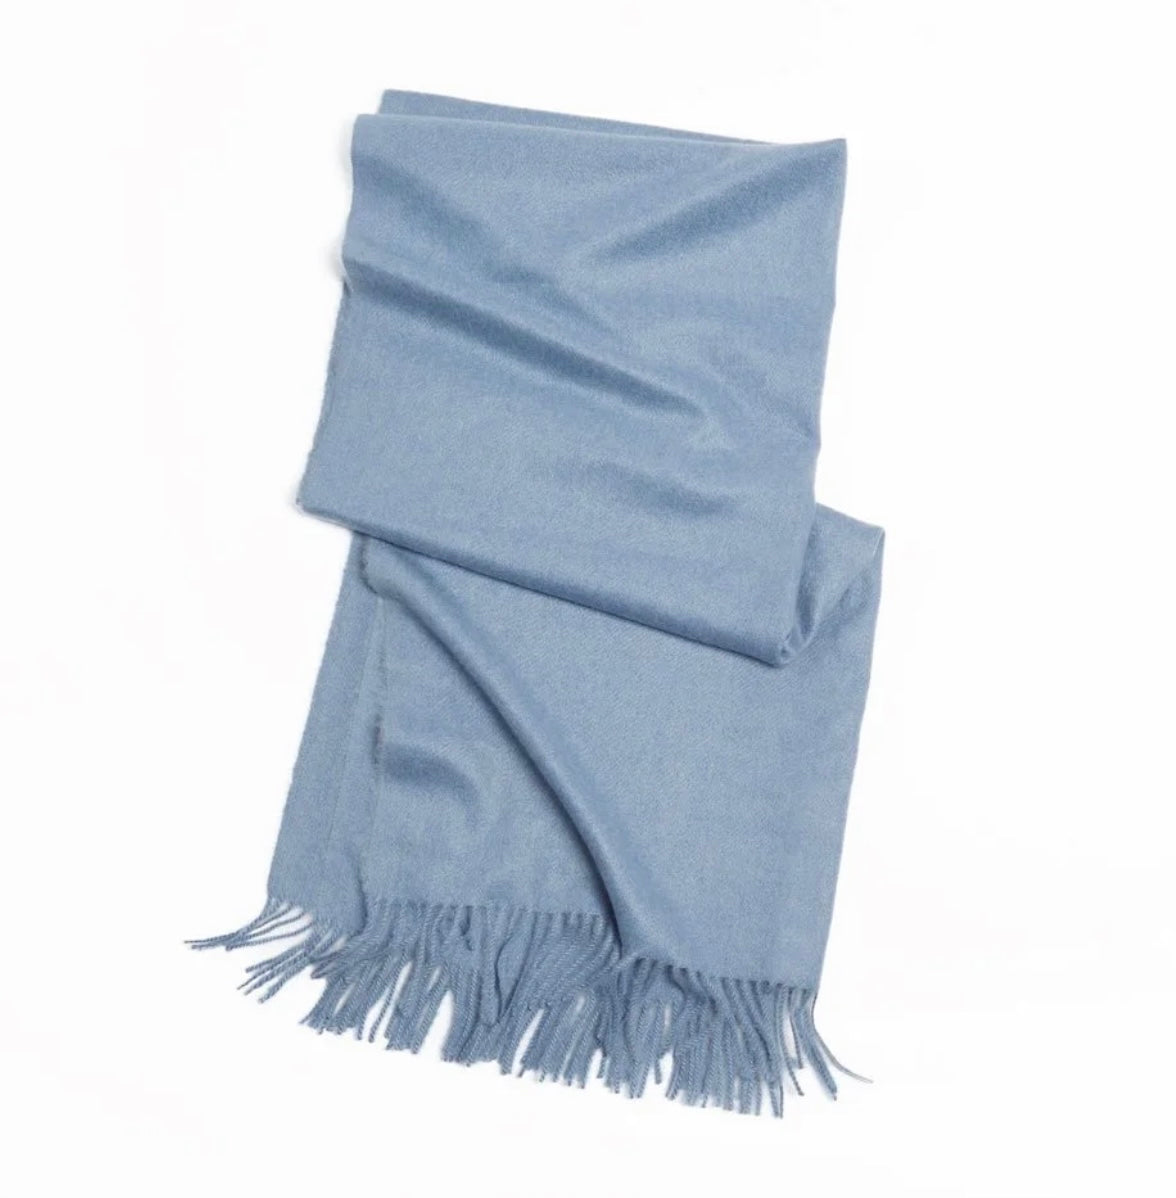 Cashmere Scarf + Shawl + Blanket - 5 gorgeous colors!